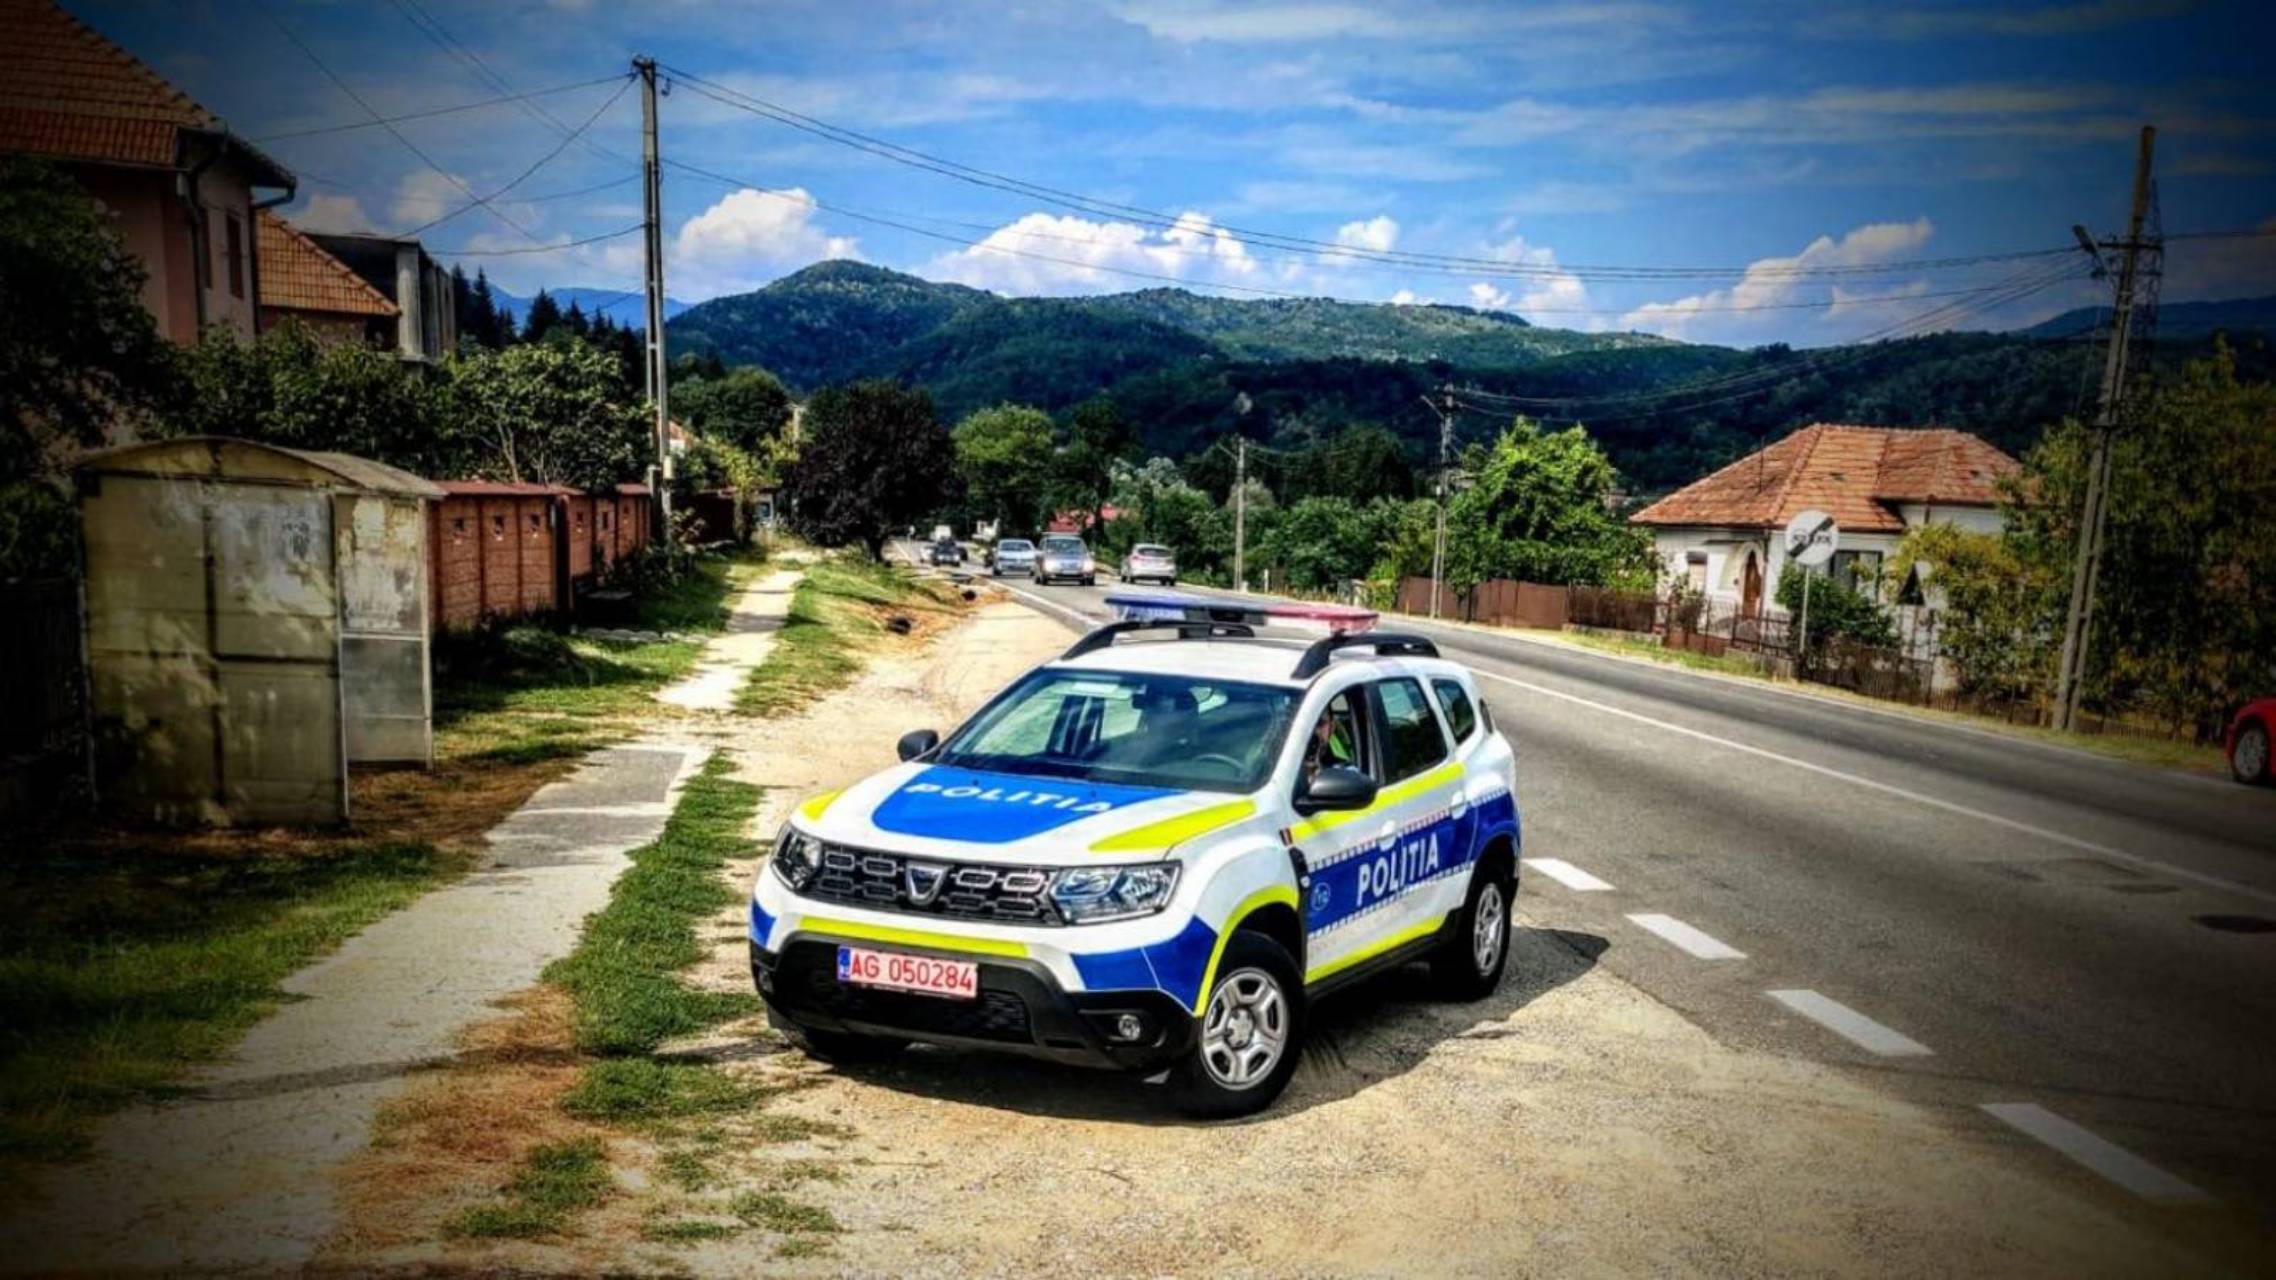 The Romanian police make frequent checks